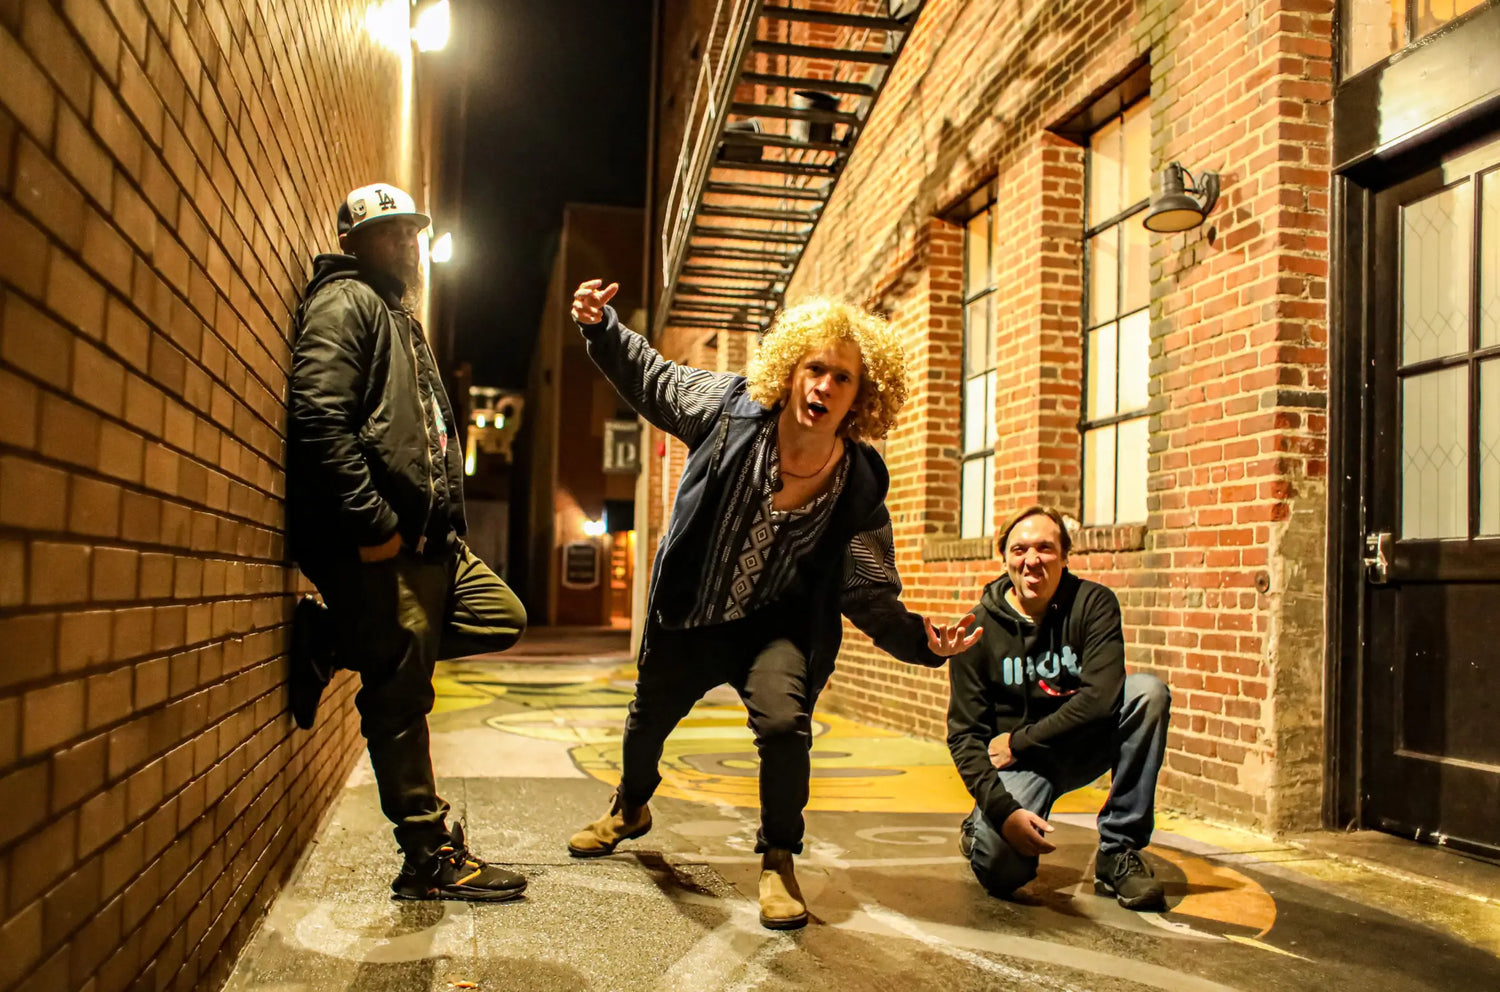 The Isaac Hadden Organ Trio posing for the camera in a back alley way under a street light.